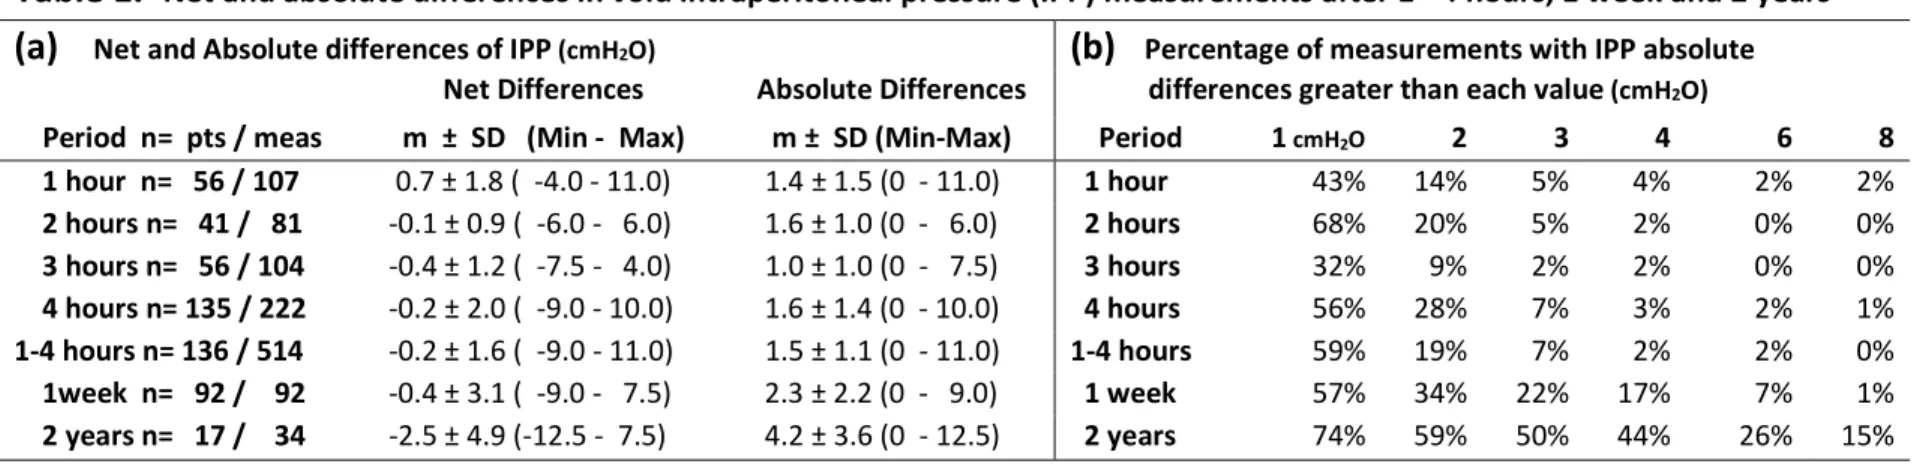 Table 1.-  Net and absolute differences in void intraperitoneal pressure (IPP) measurements after 1 - 4 hours, 1 week and 2 years 